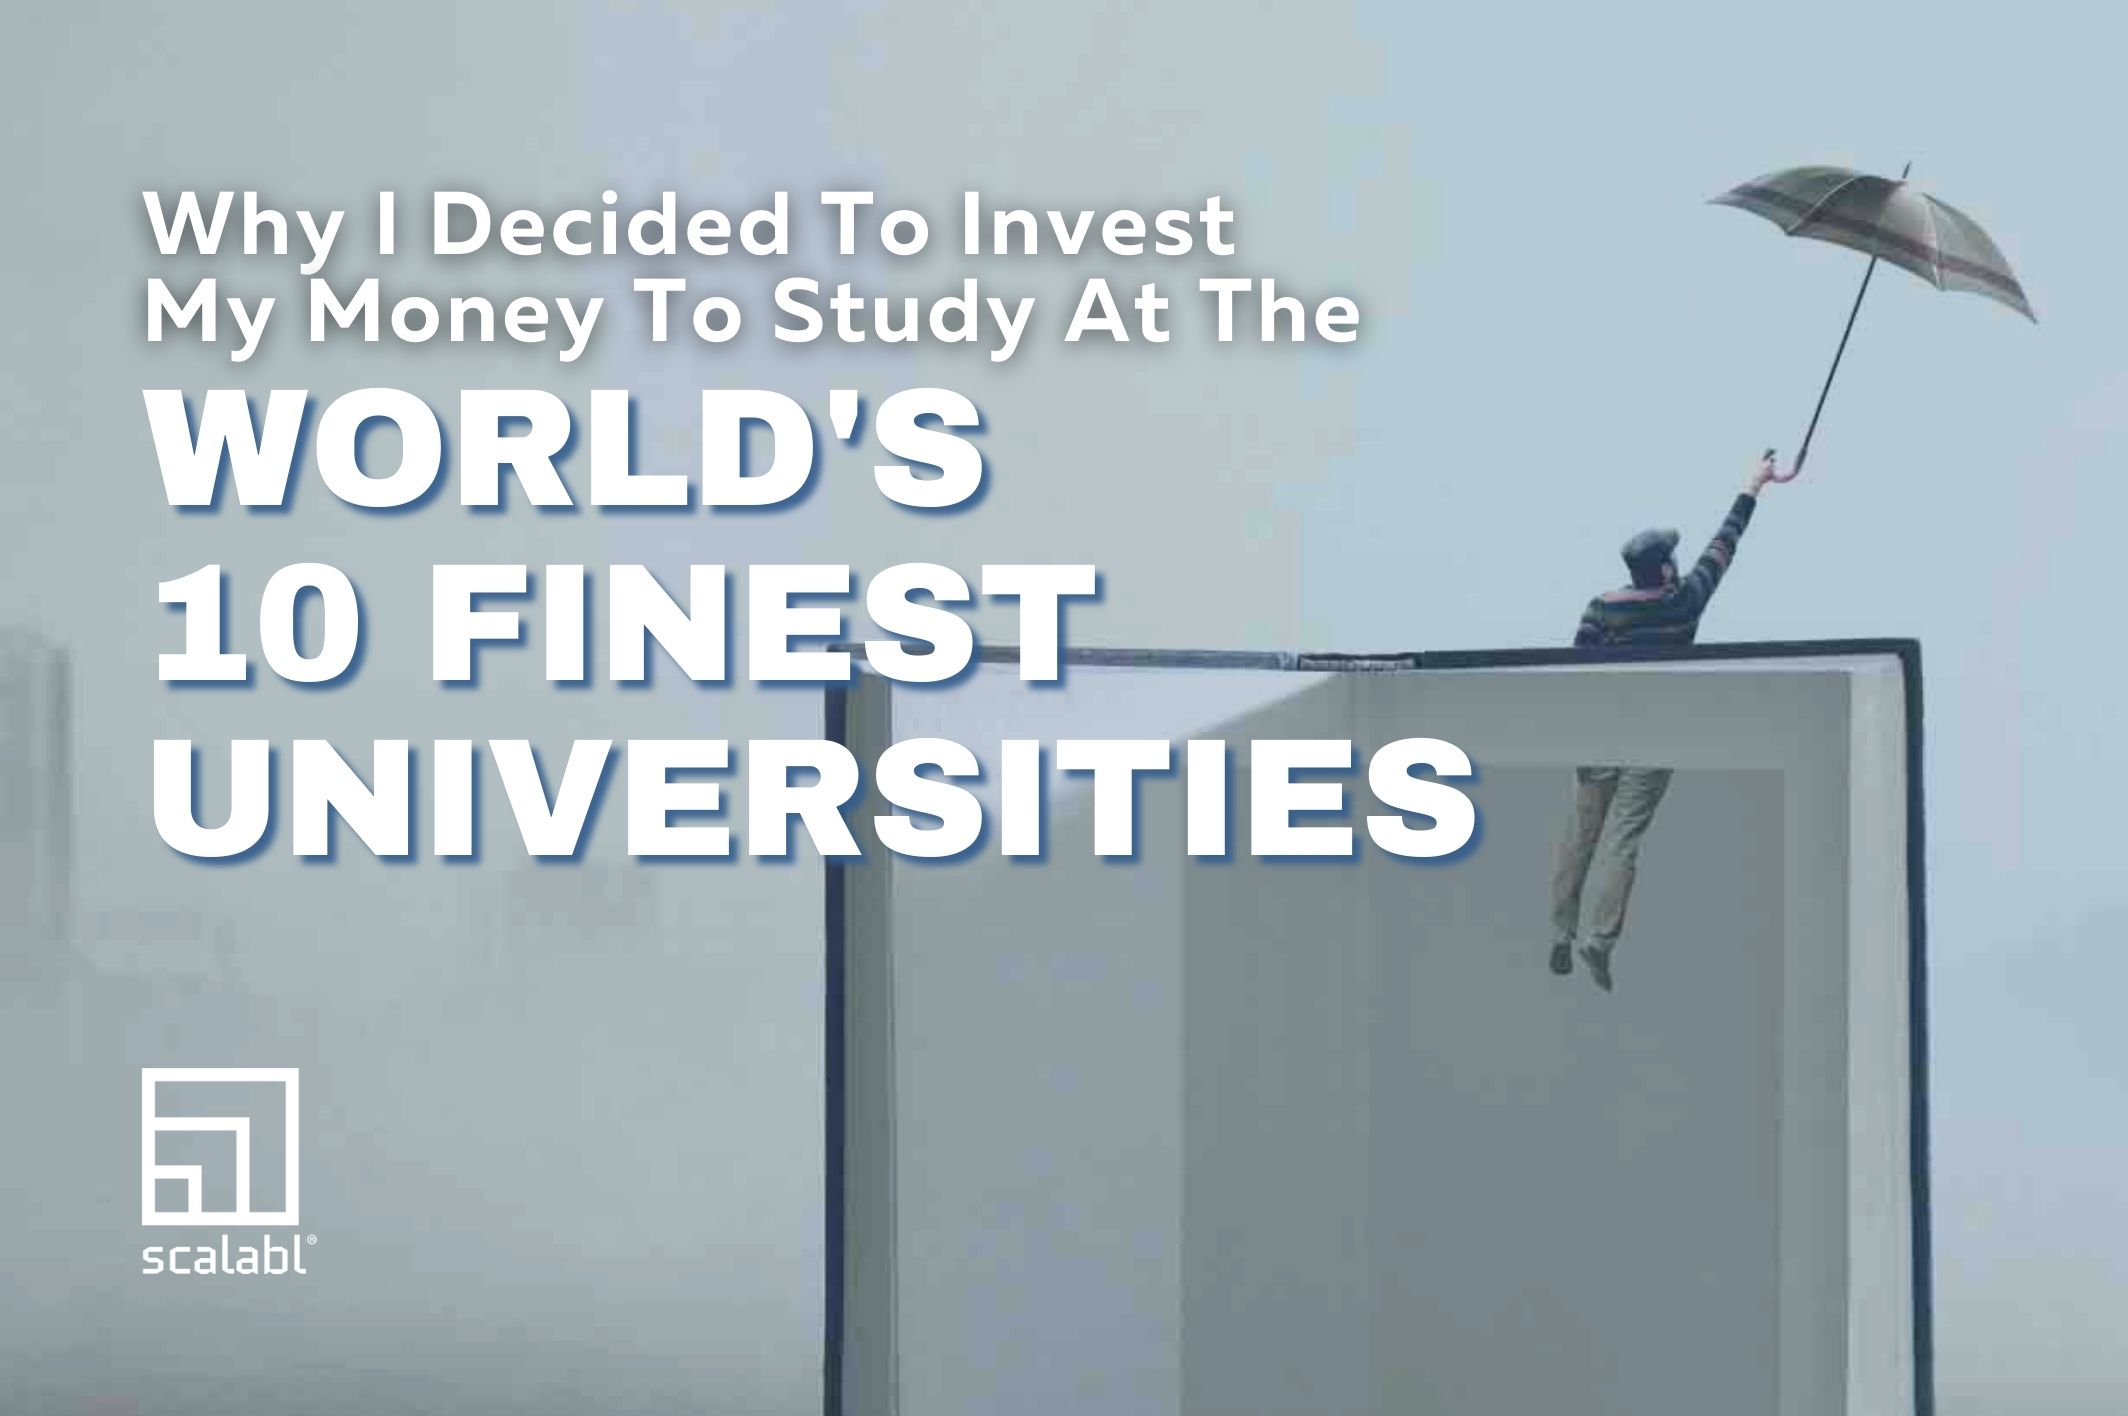 Why I Decided to Invest My Money in Studying at the Best Universities in the World